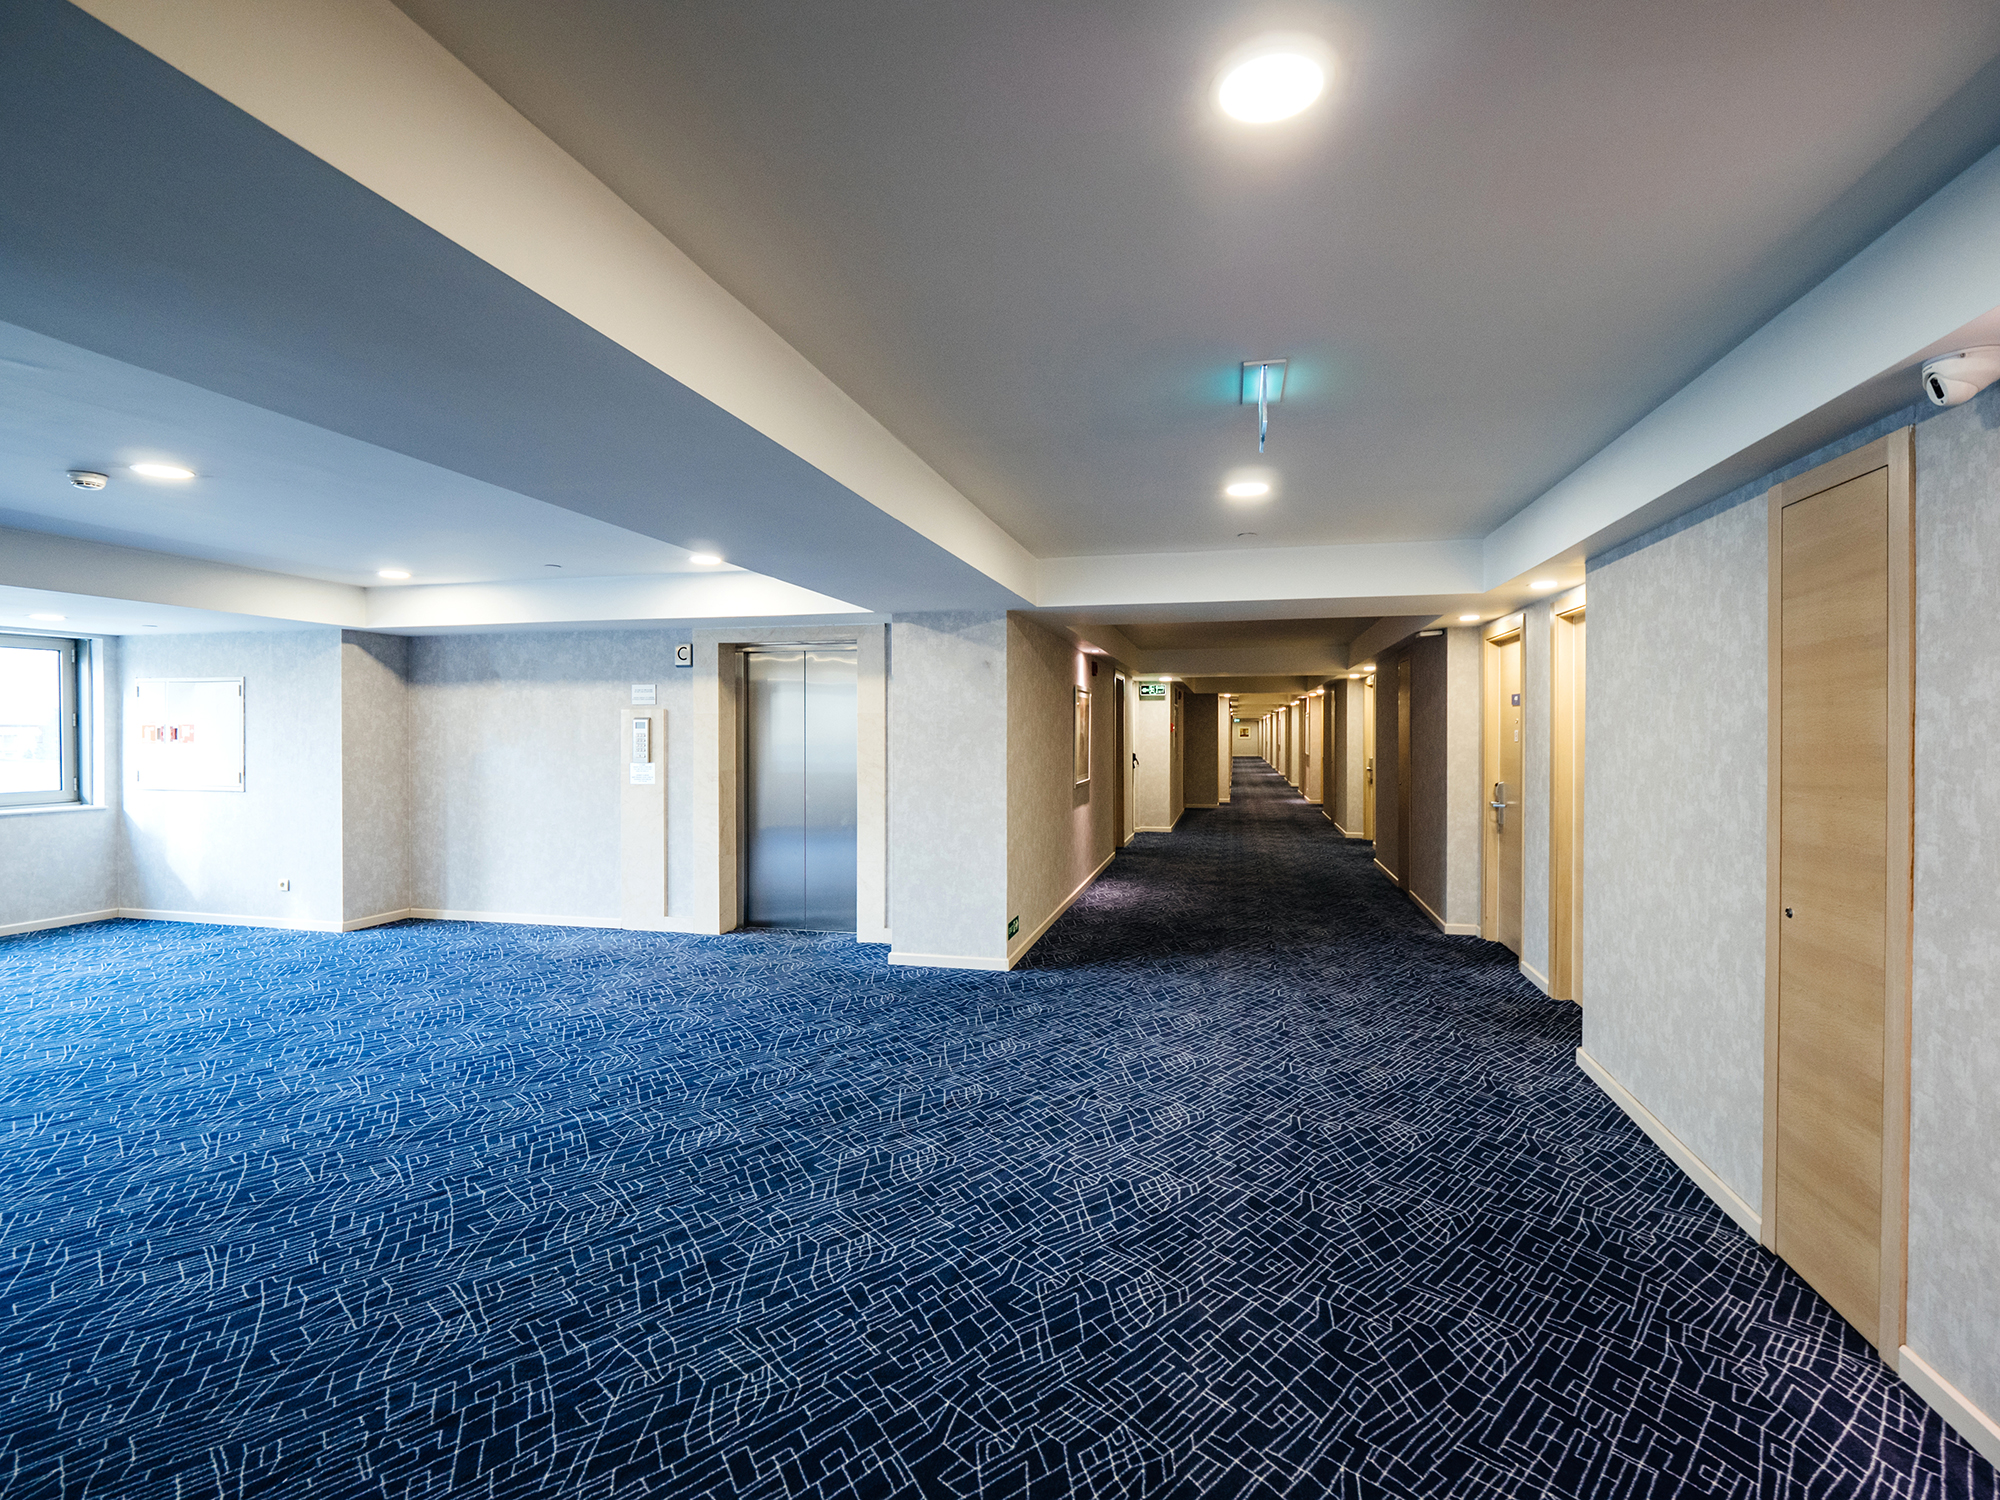 Photograph of a hallway and elevator bank of a floor in a hotel, with dark blue carpet and off-white walls.